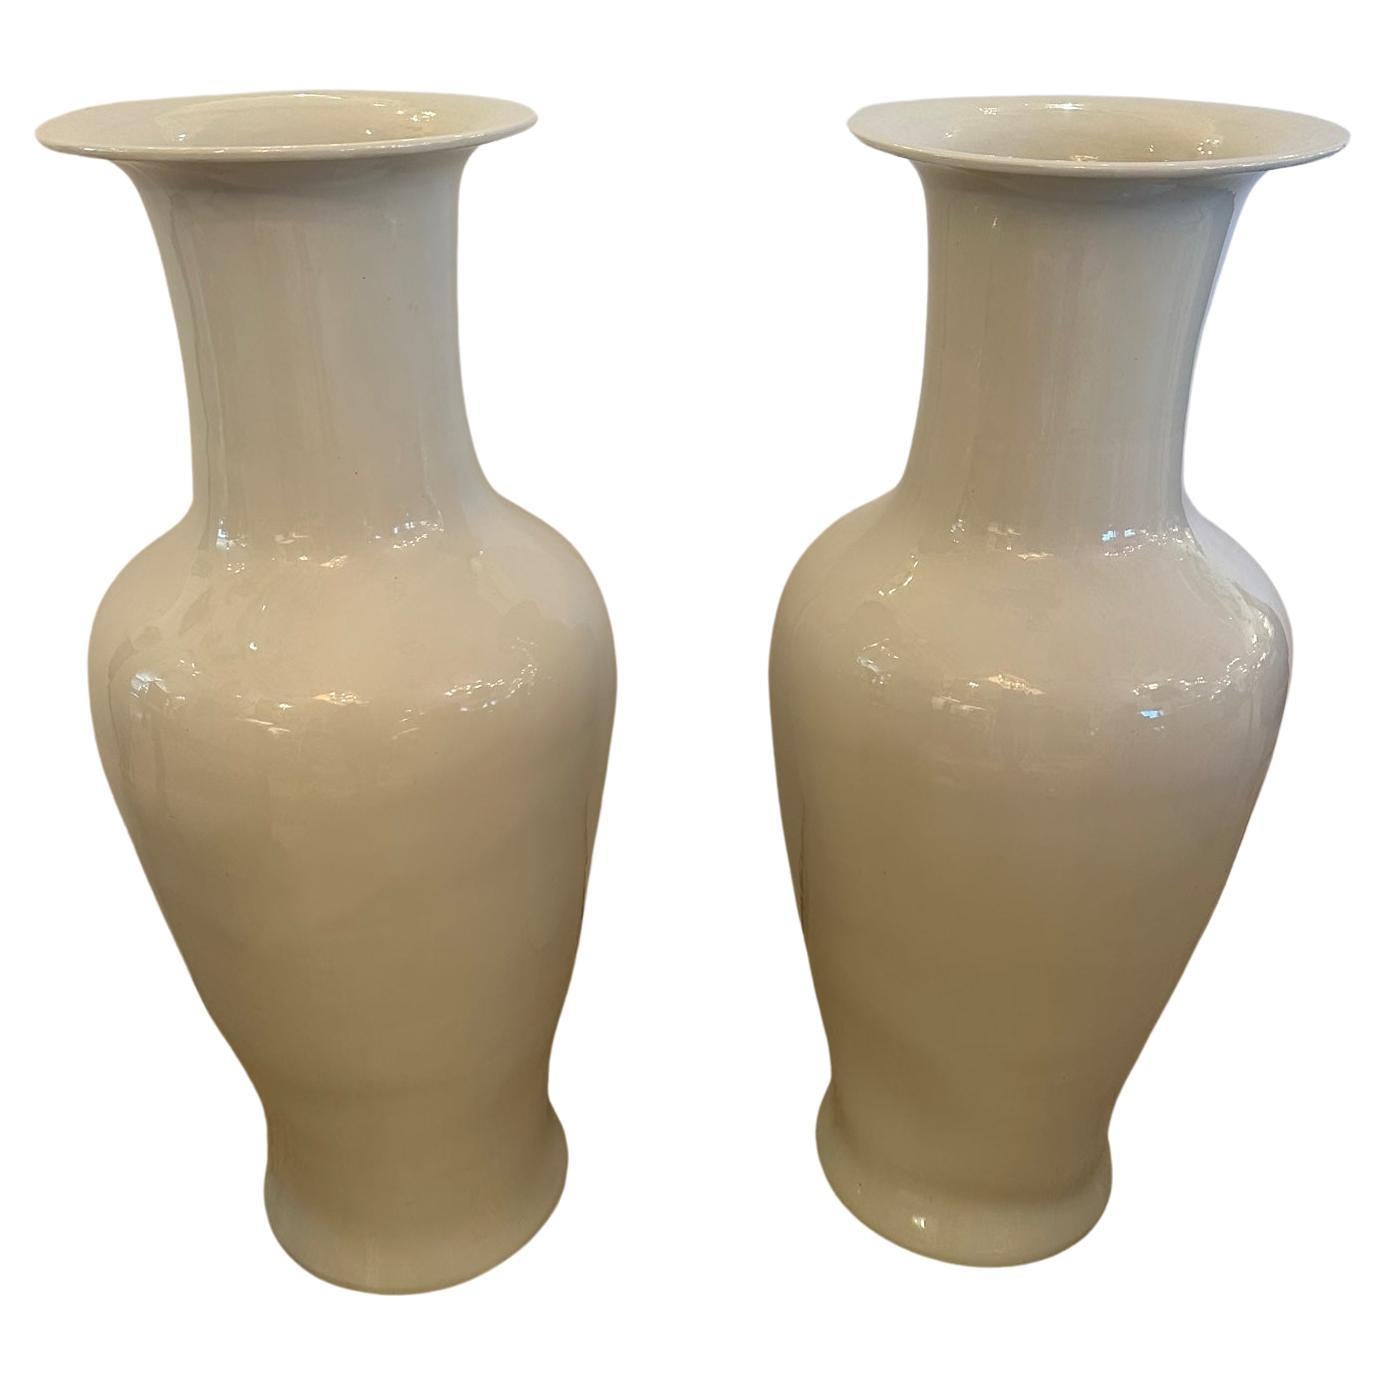 Enormous Pair of Blanc de Chine Asian Floor Vases with Striking Scale For Sale